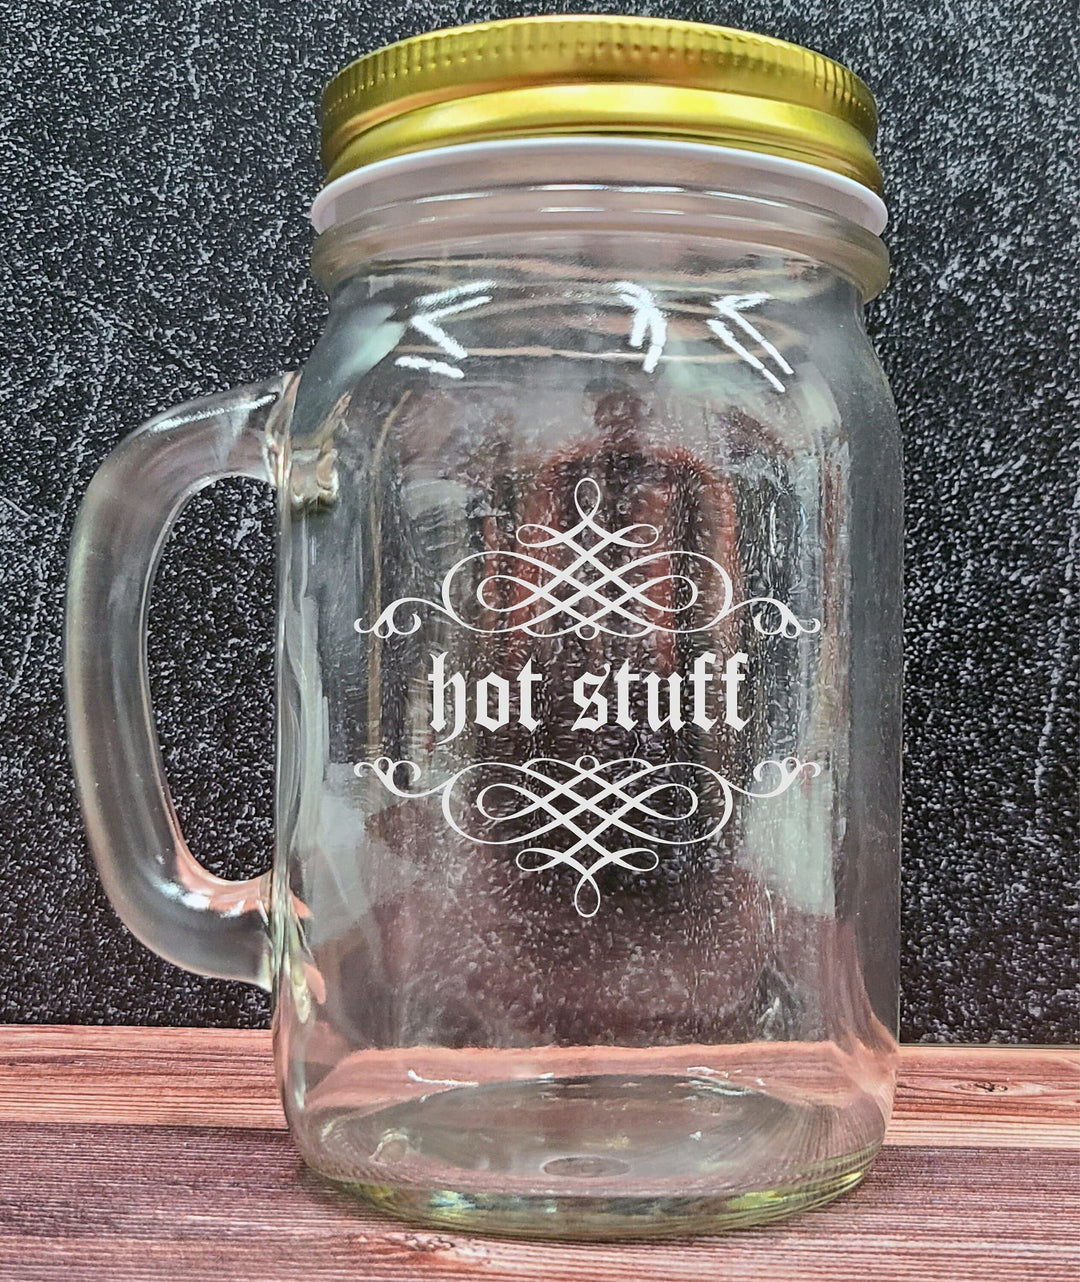 Custom Mason Jar with Lid - Personalized Engraved 16 oz Round Mason Jar Drinking Glass. Gifts for him, groomsmen gifts.